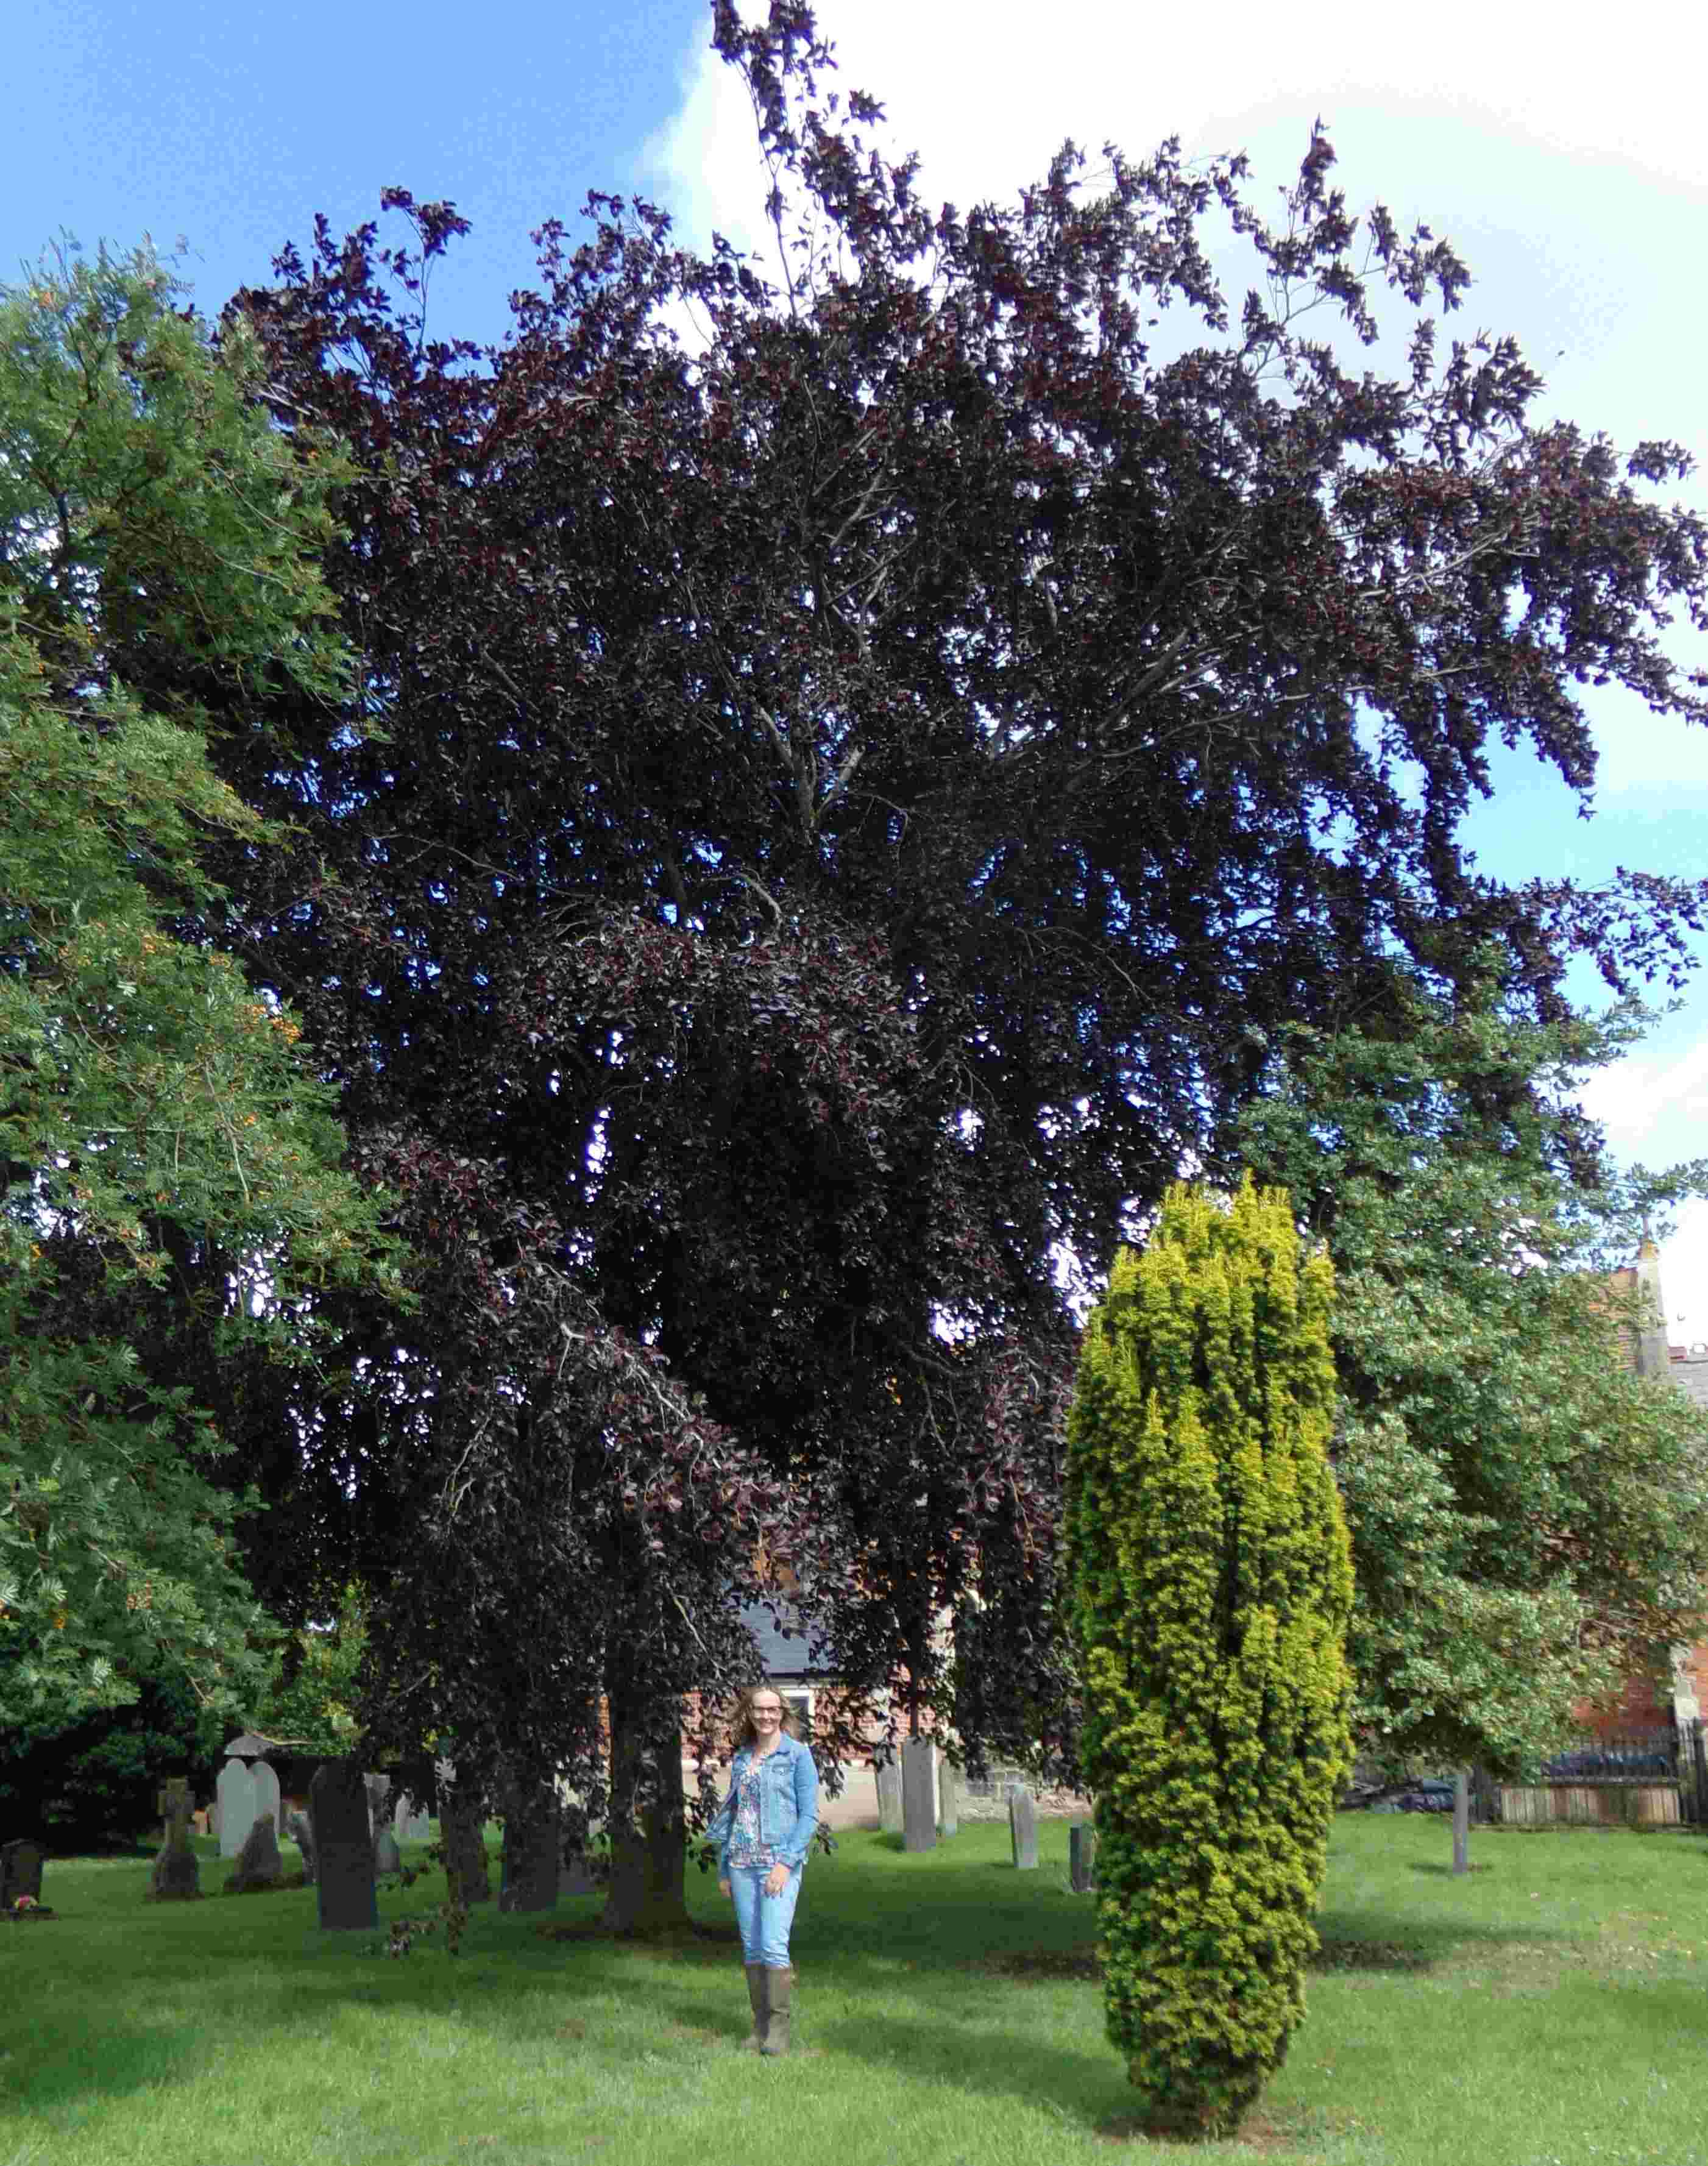 Claire standing in front of the copper beech tree